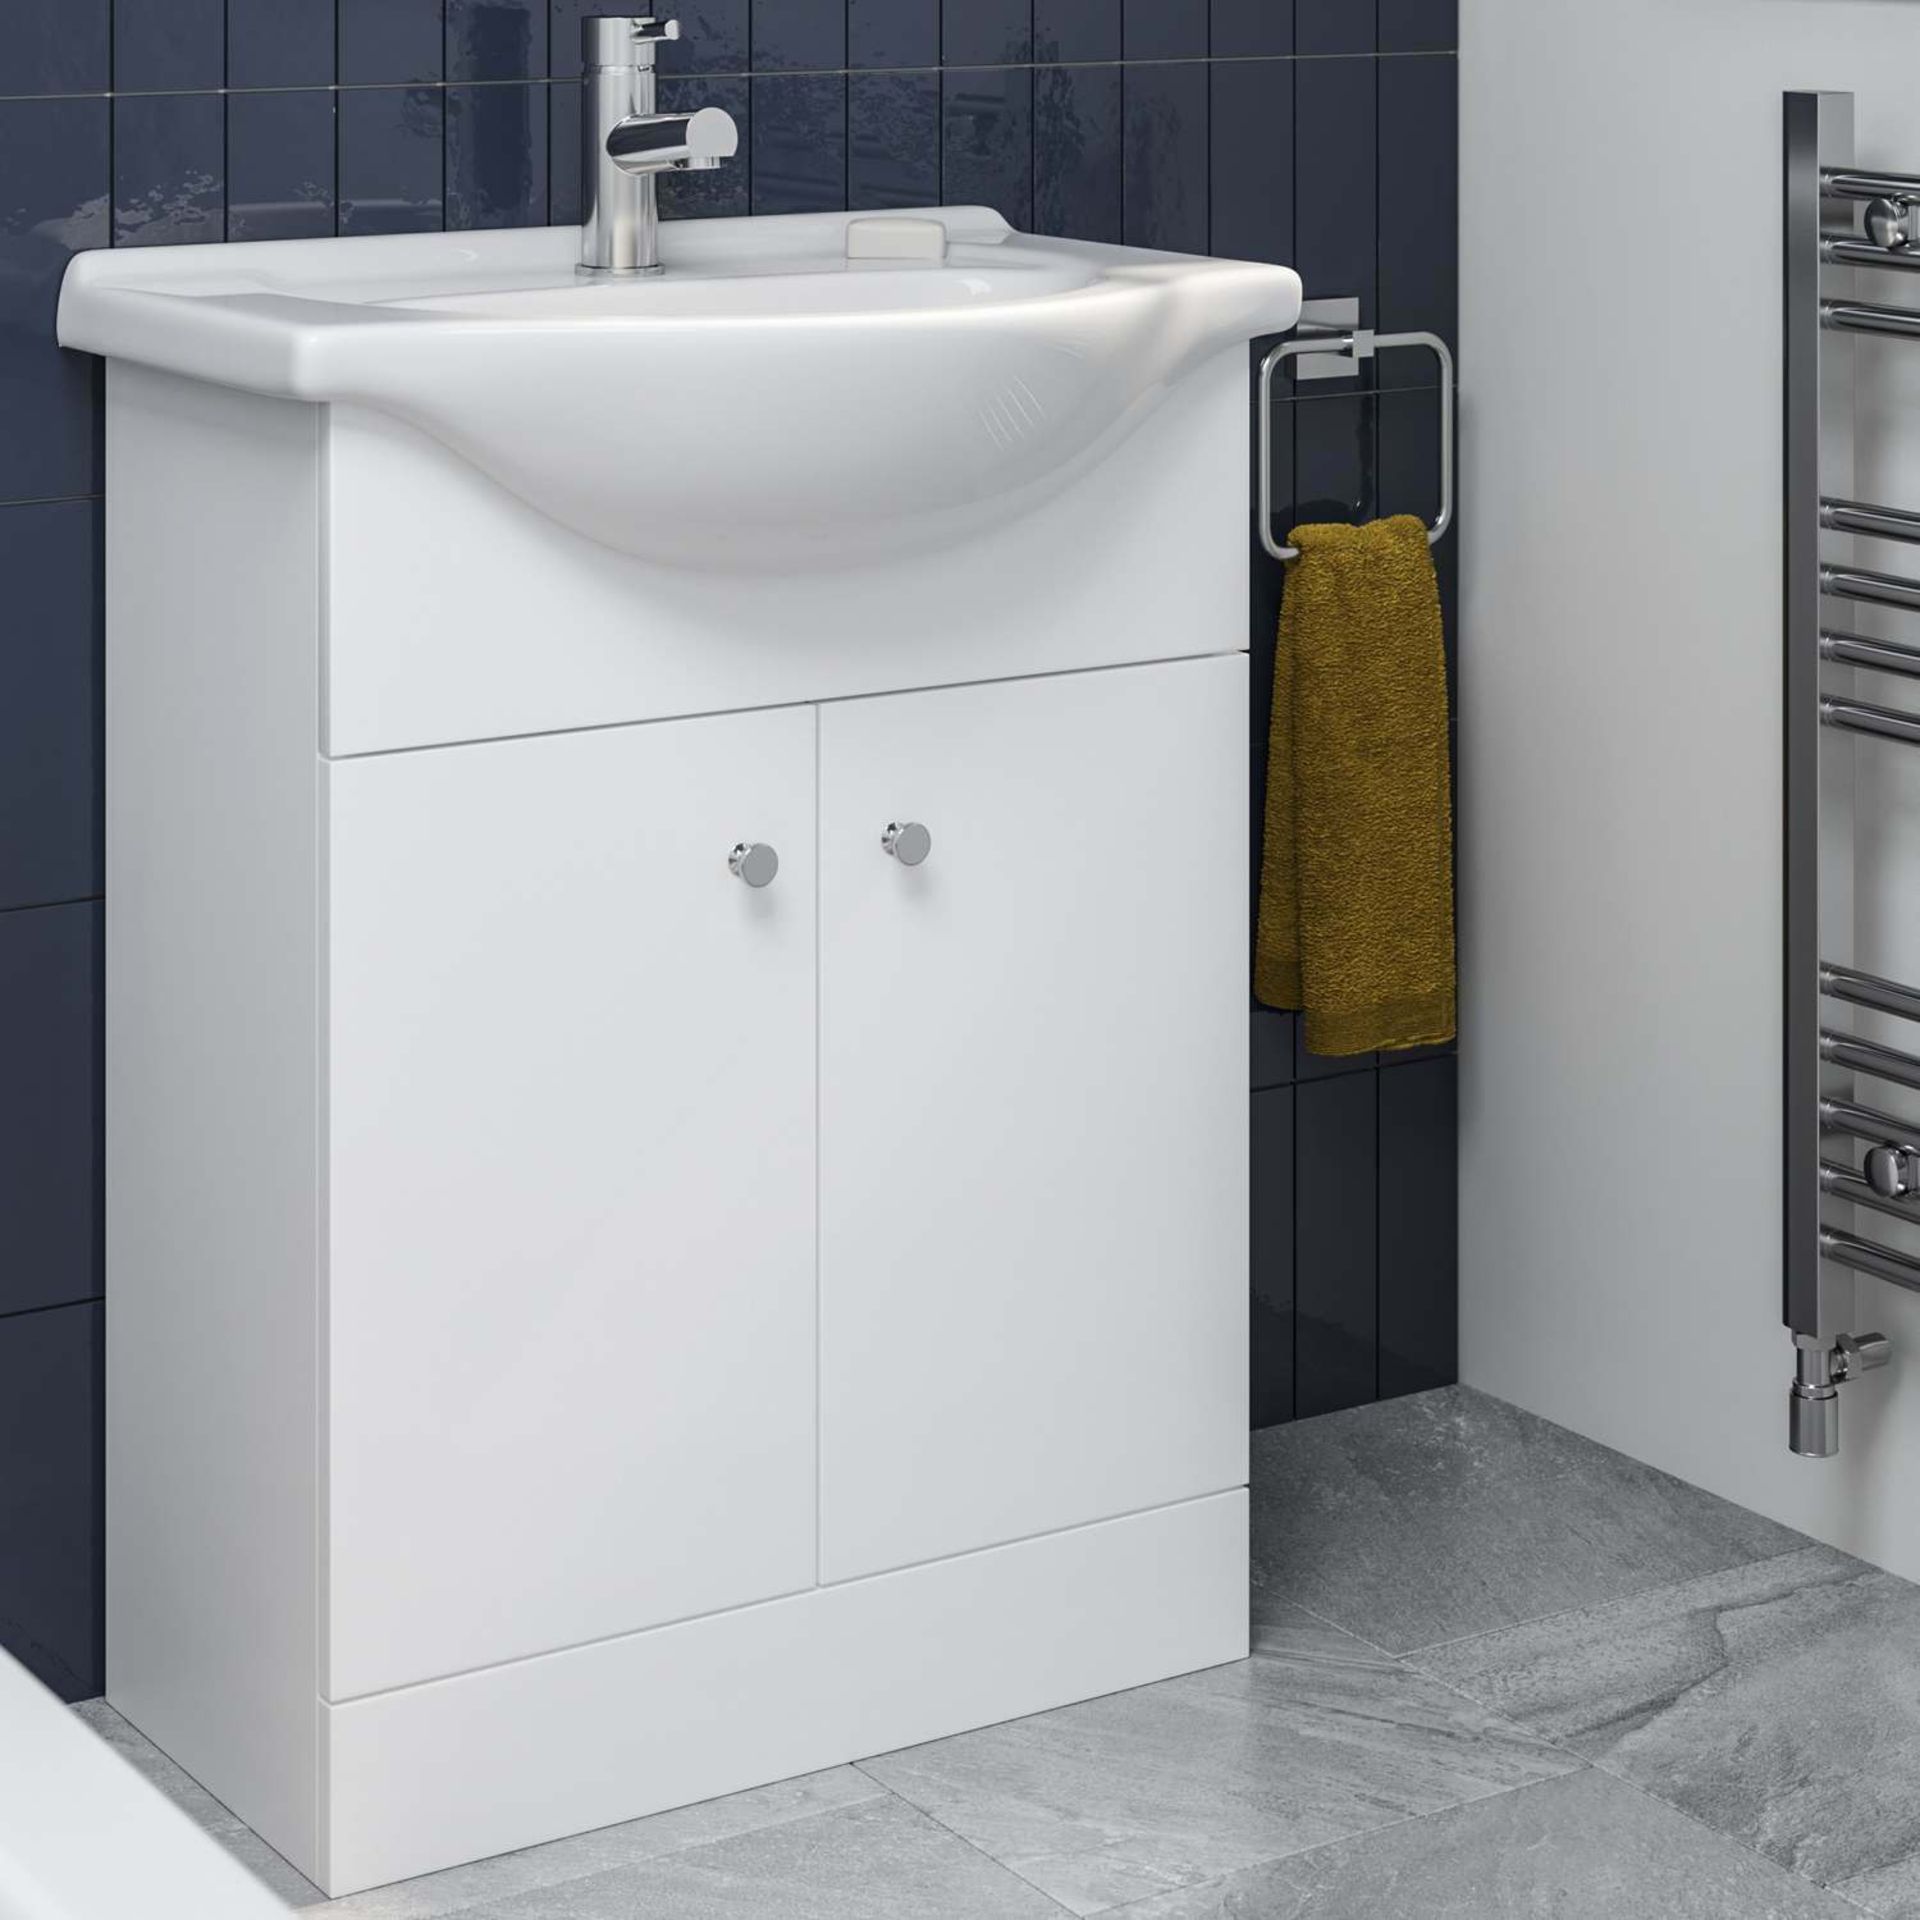 BRAND NEW BOXED 600mm Quartz White Basin Vanity Unit- Floor Standing. RRP £219.99. Comes complete - Image 2 of 2